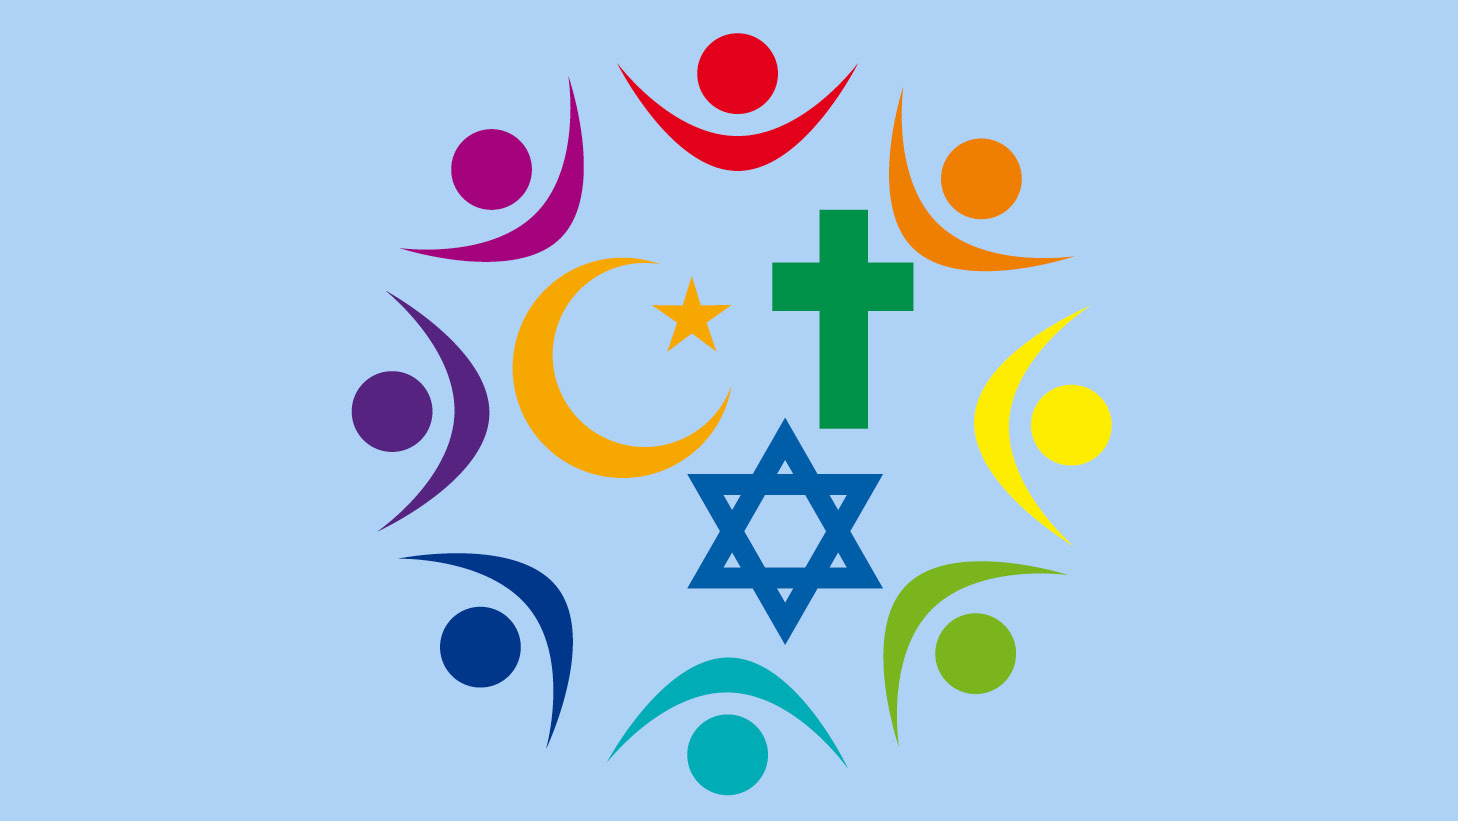 A center cluster of religious symbols for Islam (Crescent and Star), Christianity (Cross) and Judaism (Star of David) surrounded by a circle of eight abstract symbols of people with their arms raised.